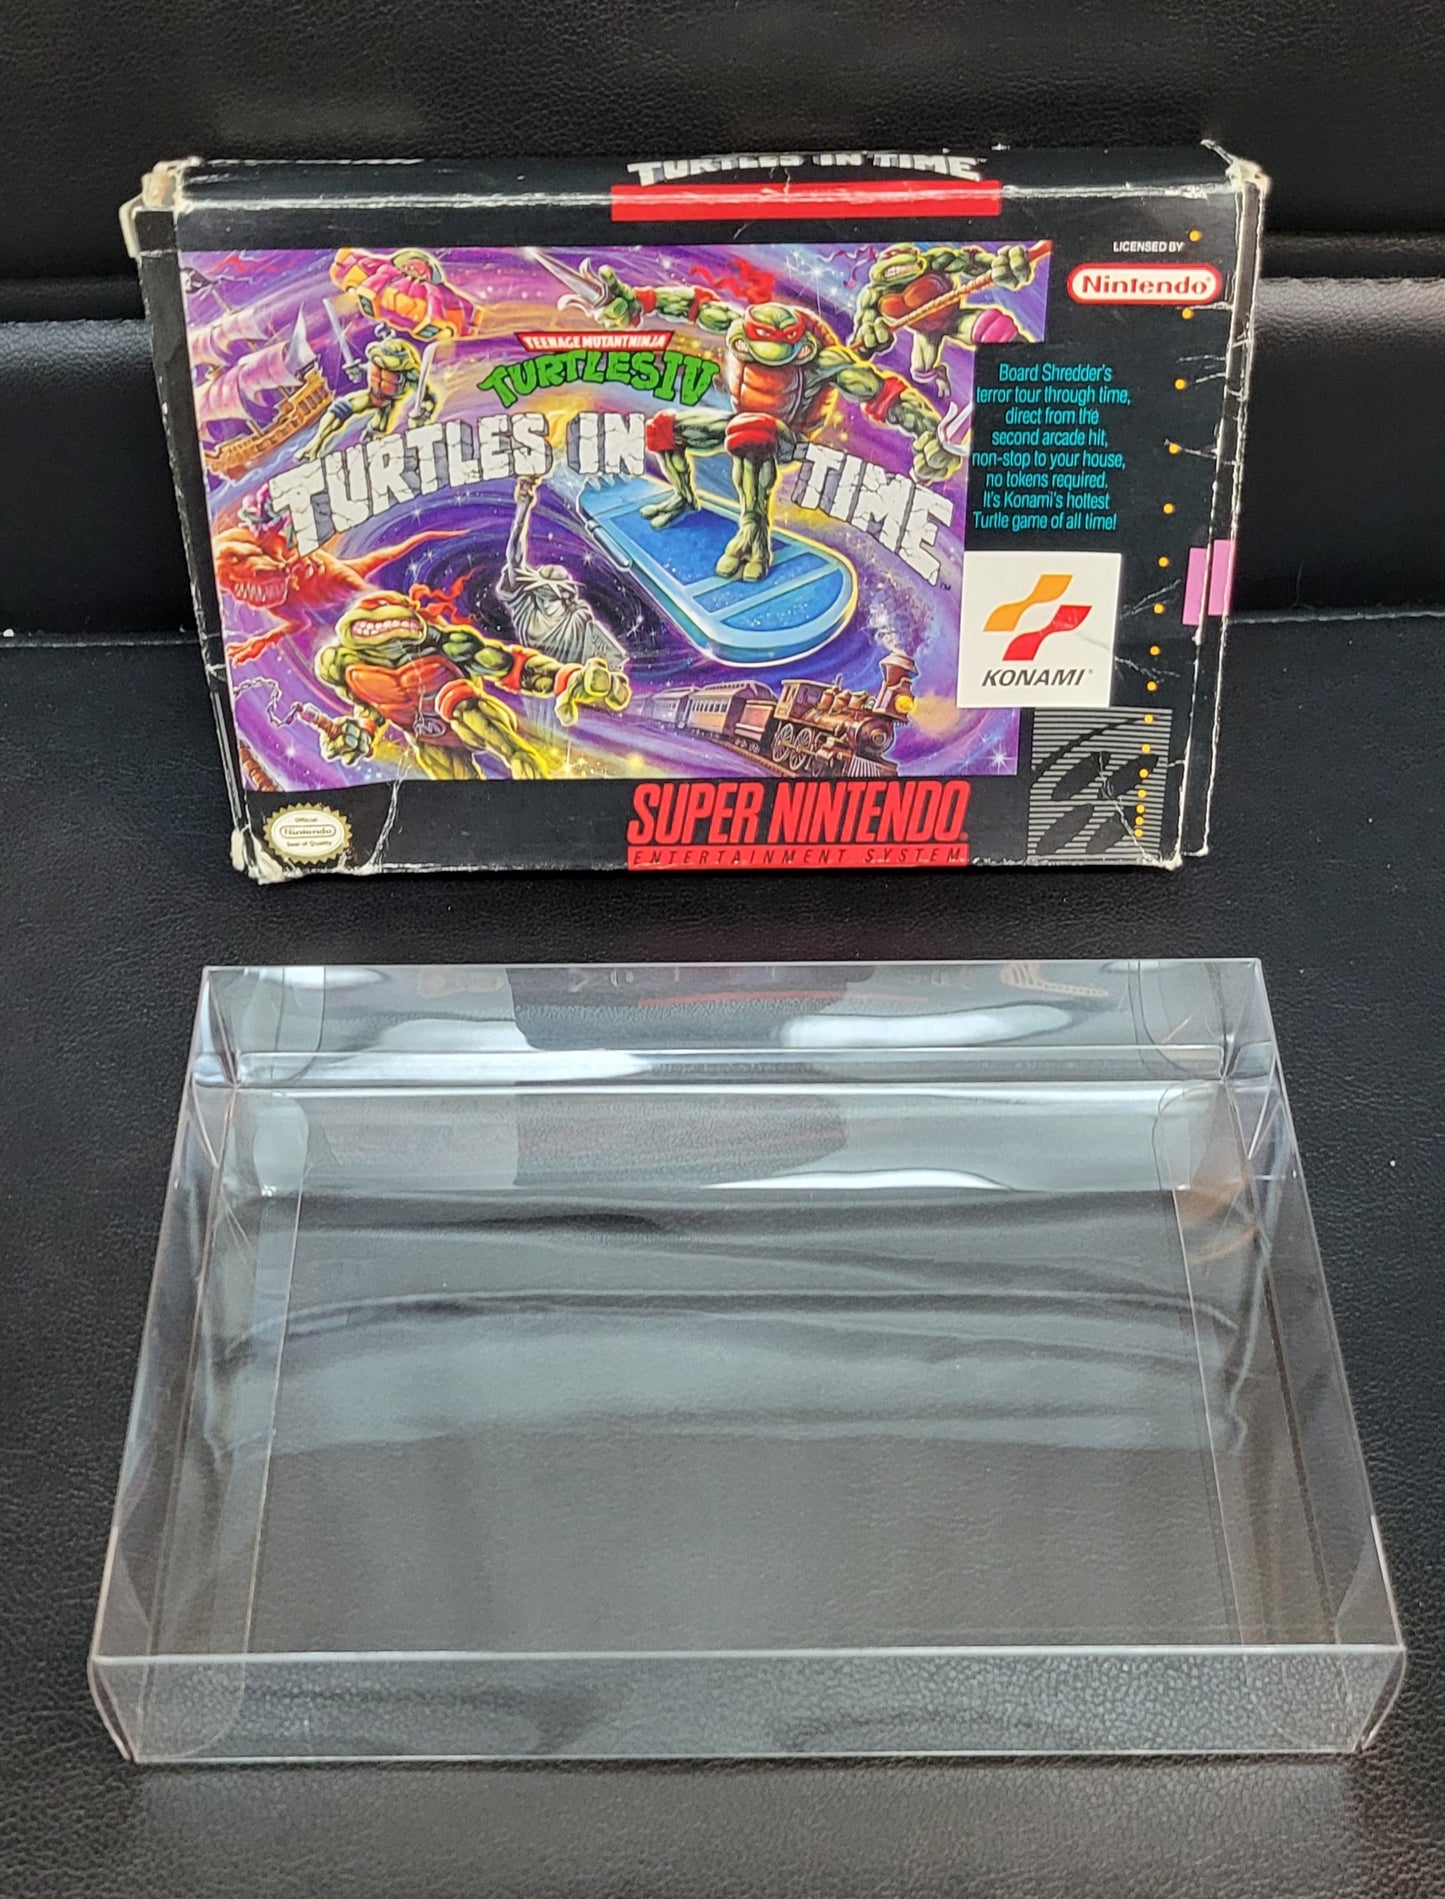 TMNT Turtles In Time AUTHENTIC CIB Box + Manual - SNES - Super Nintendo Ent. System NTSC Cartridge Includes Plastic Protector